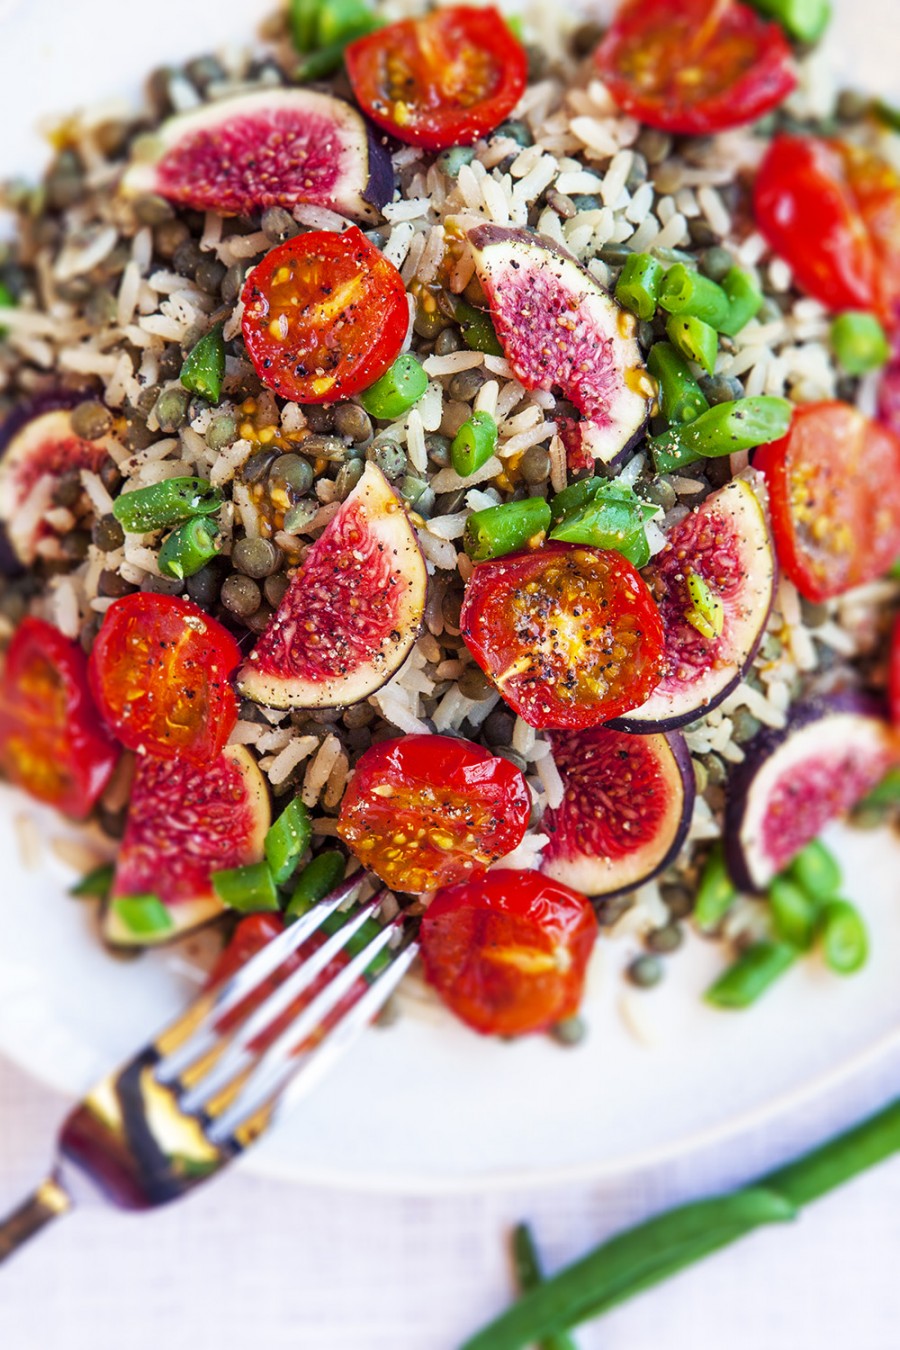 Lentil salad with brown rice and tomatos, rich of vitamin C